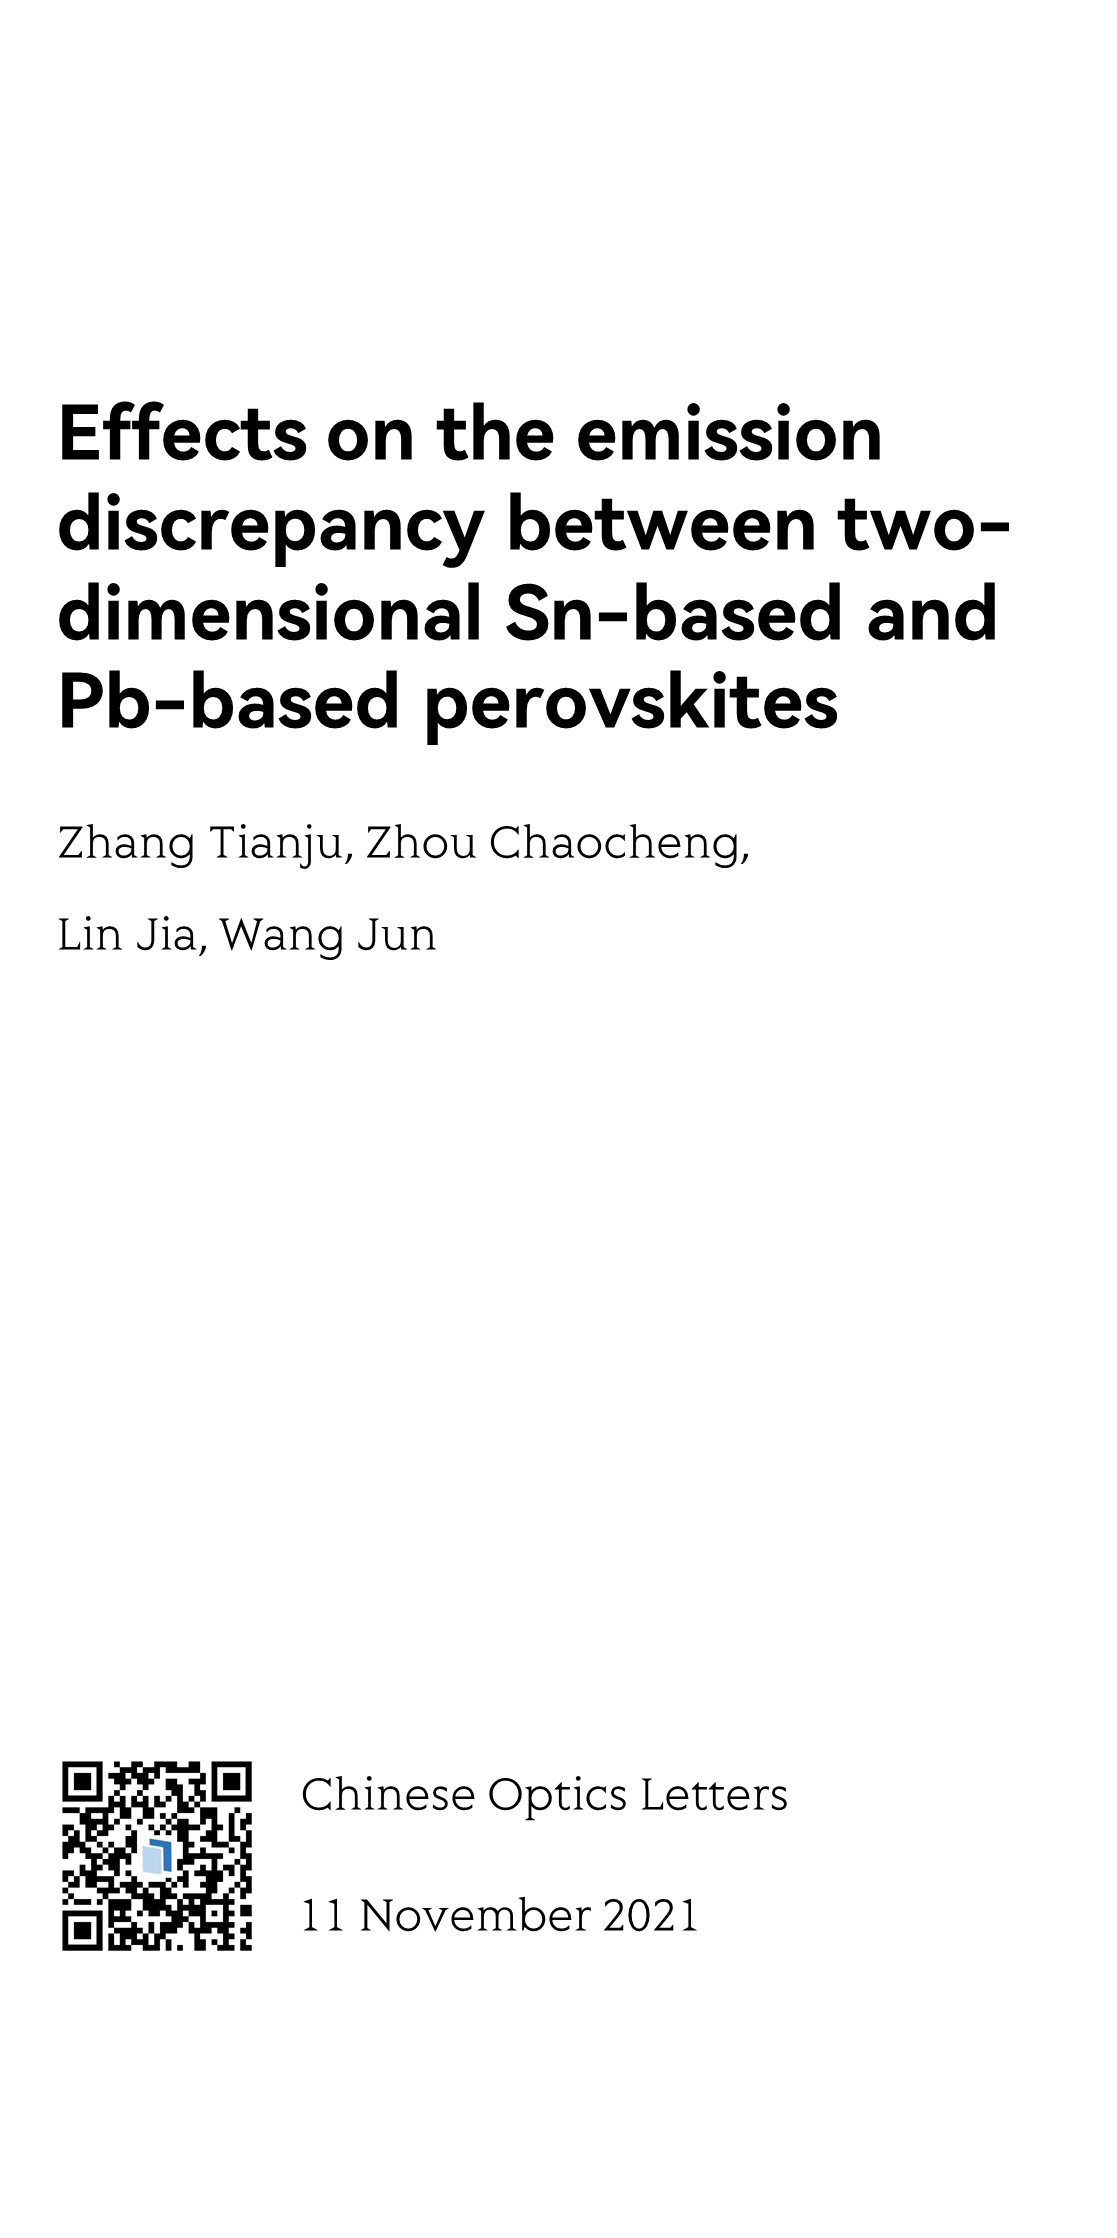 Effects on the emission discrepancy between two-dimensional Sn-based and Pb-based perovskites_1